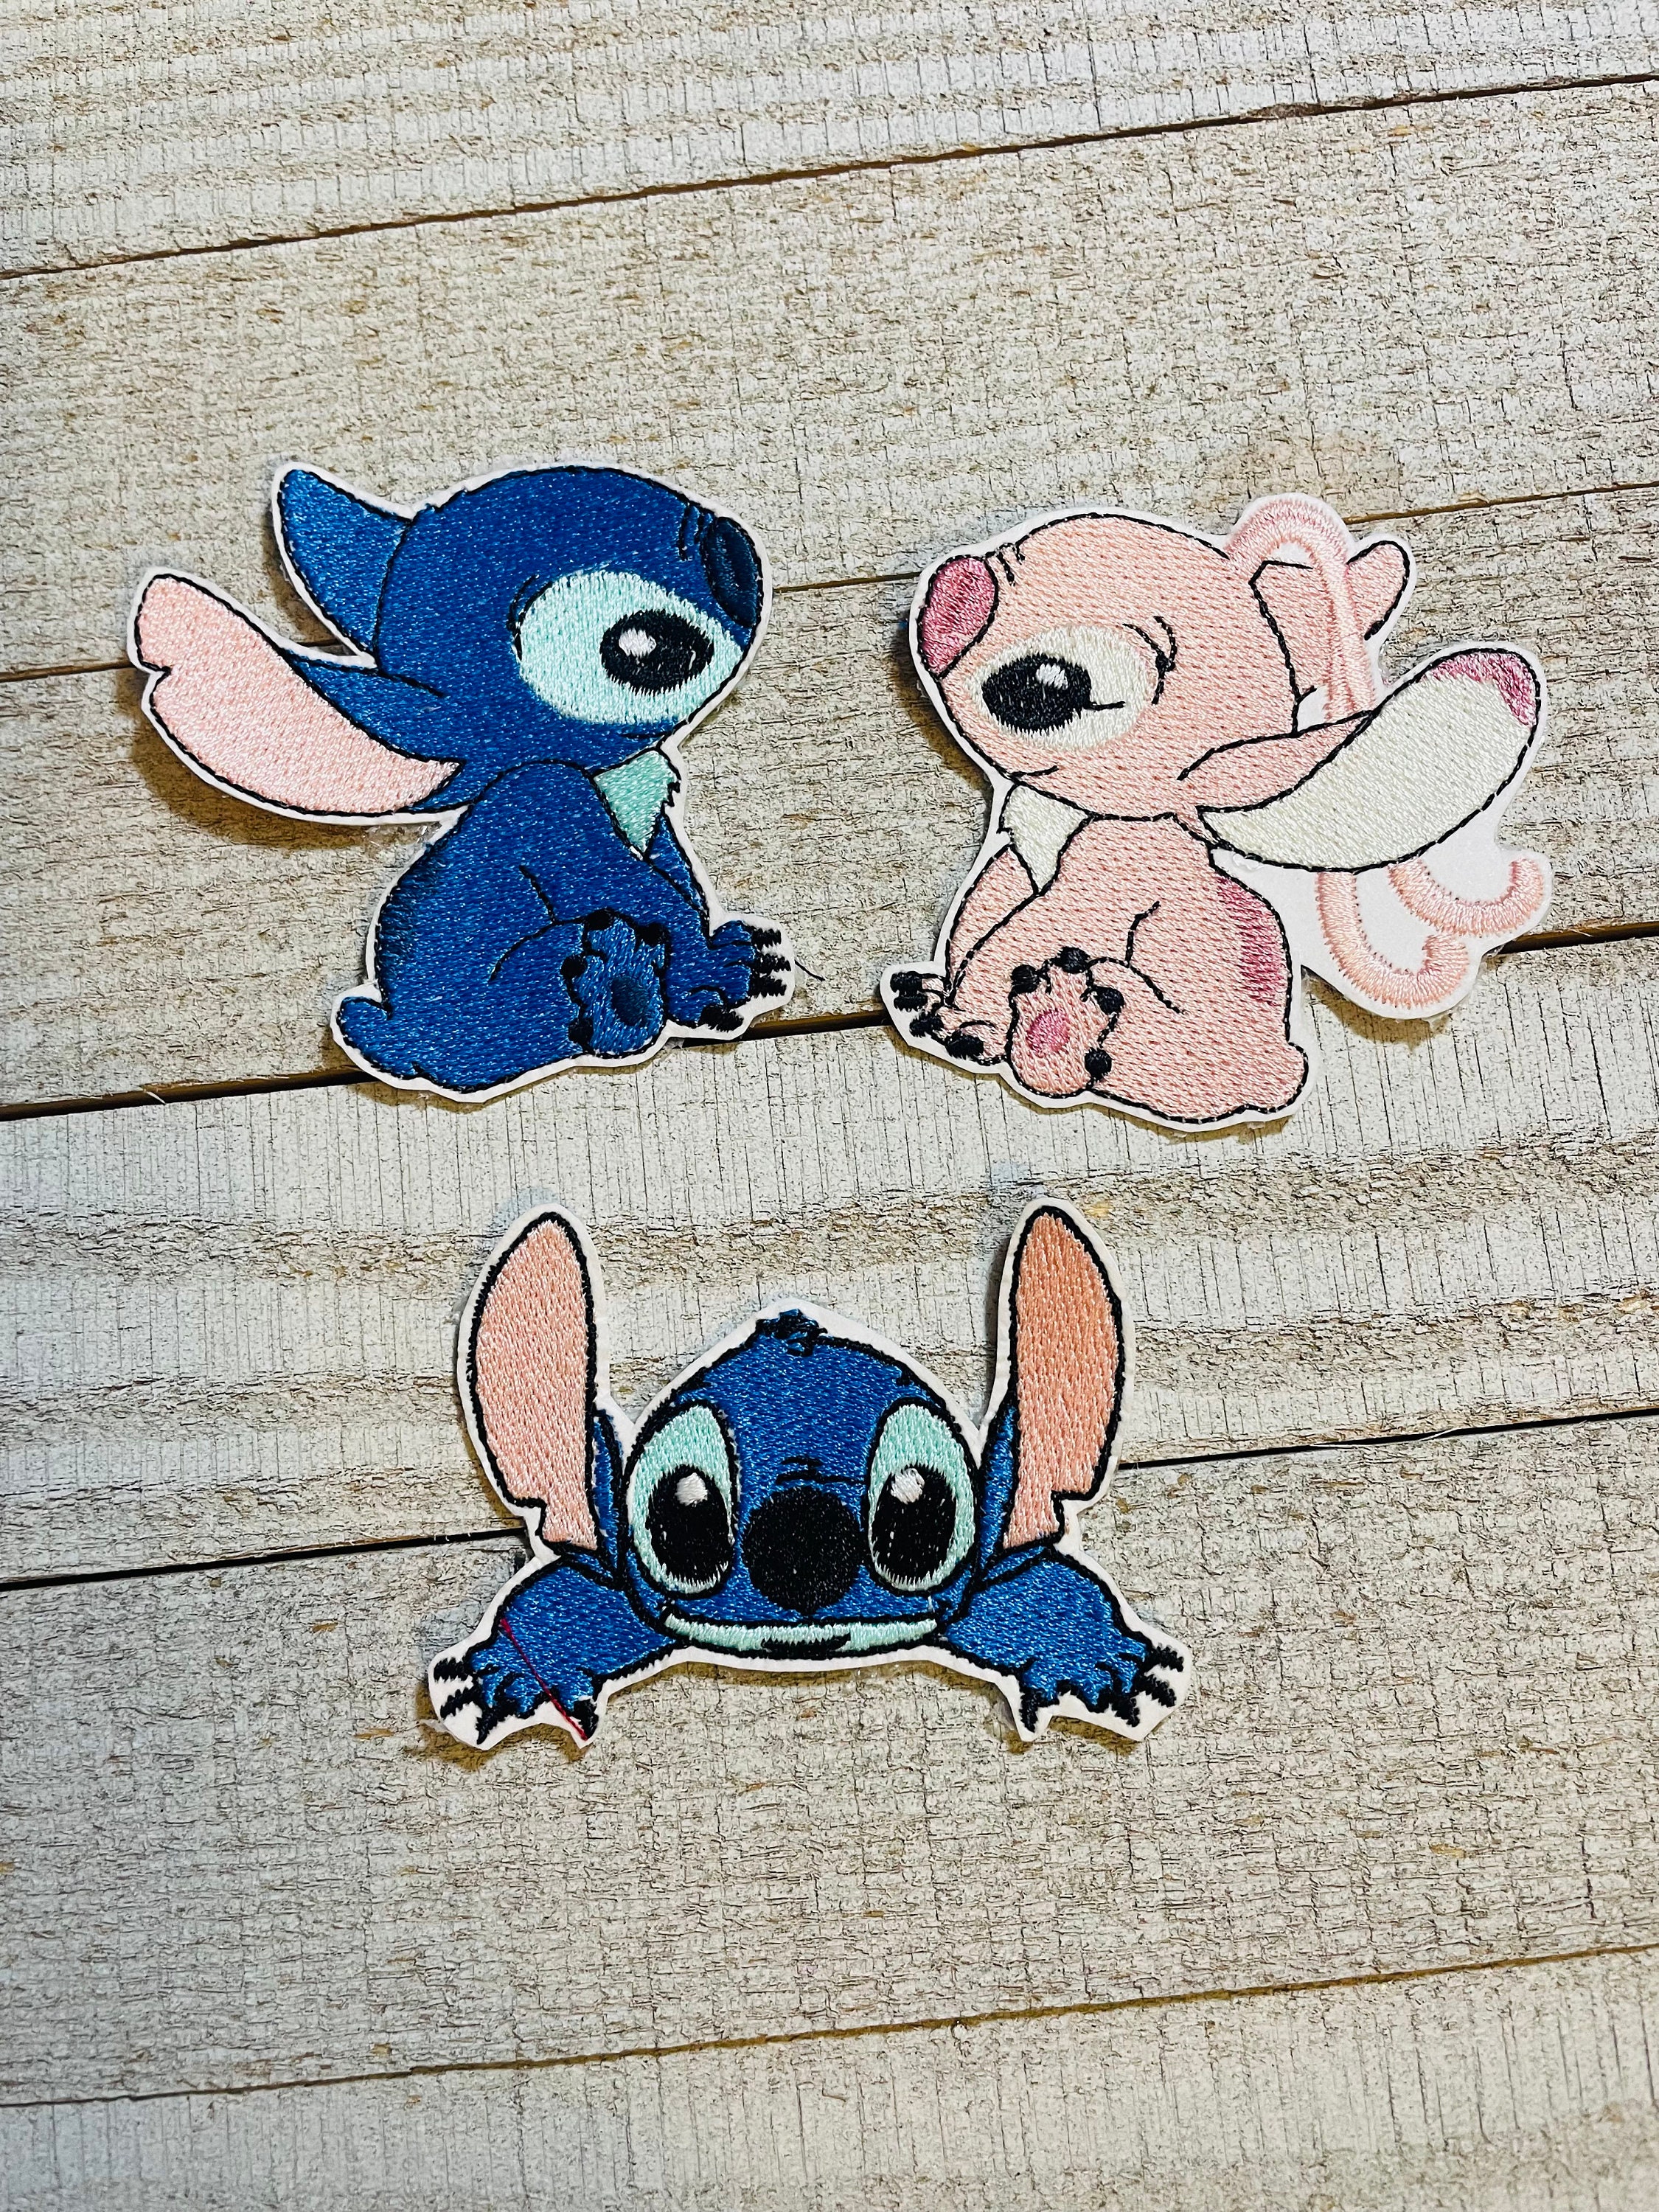  8Pcs Lilo Stitch Iron On Patches for Clothing Kids Sew on/Iron  on Appliques Decorative Embroidered Patch for Kids Clothes DIY Accessories  for T-Shirt, Jackets, Jeans, Vests,Hats, Backpacks : Arts, Crafts 